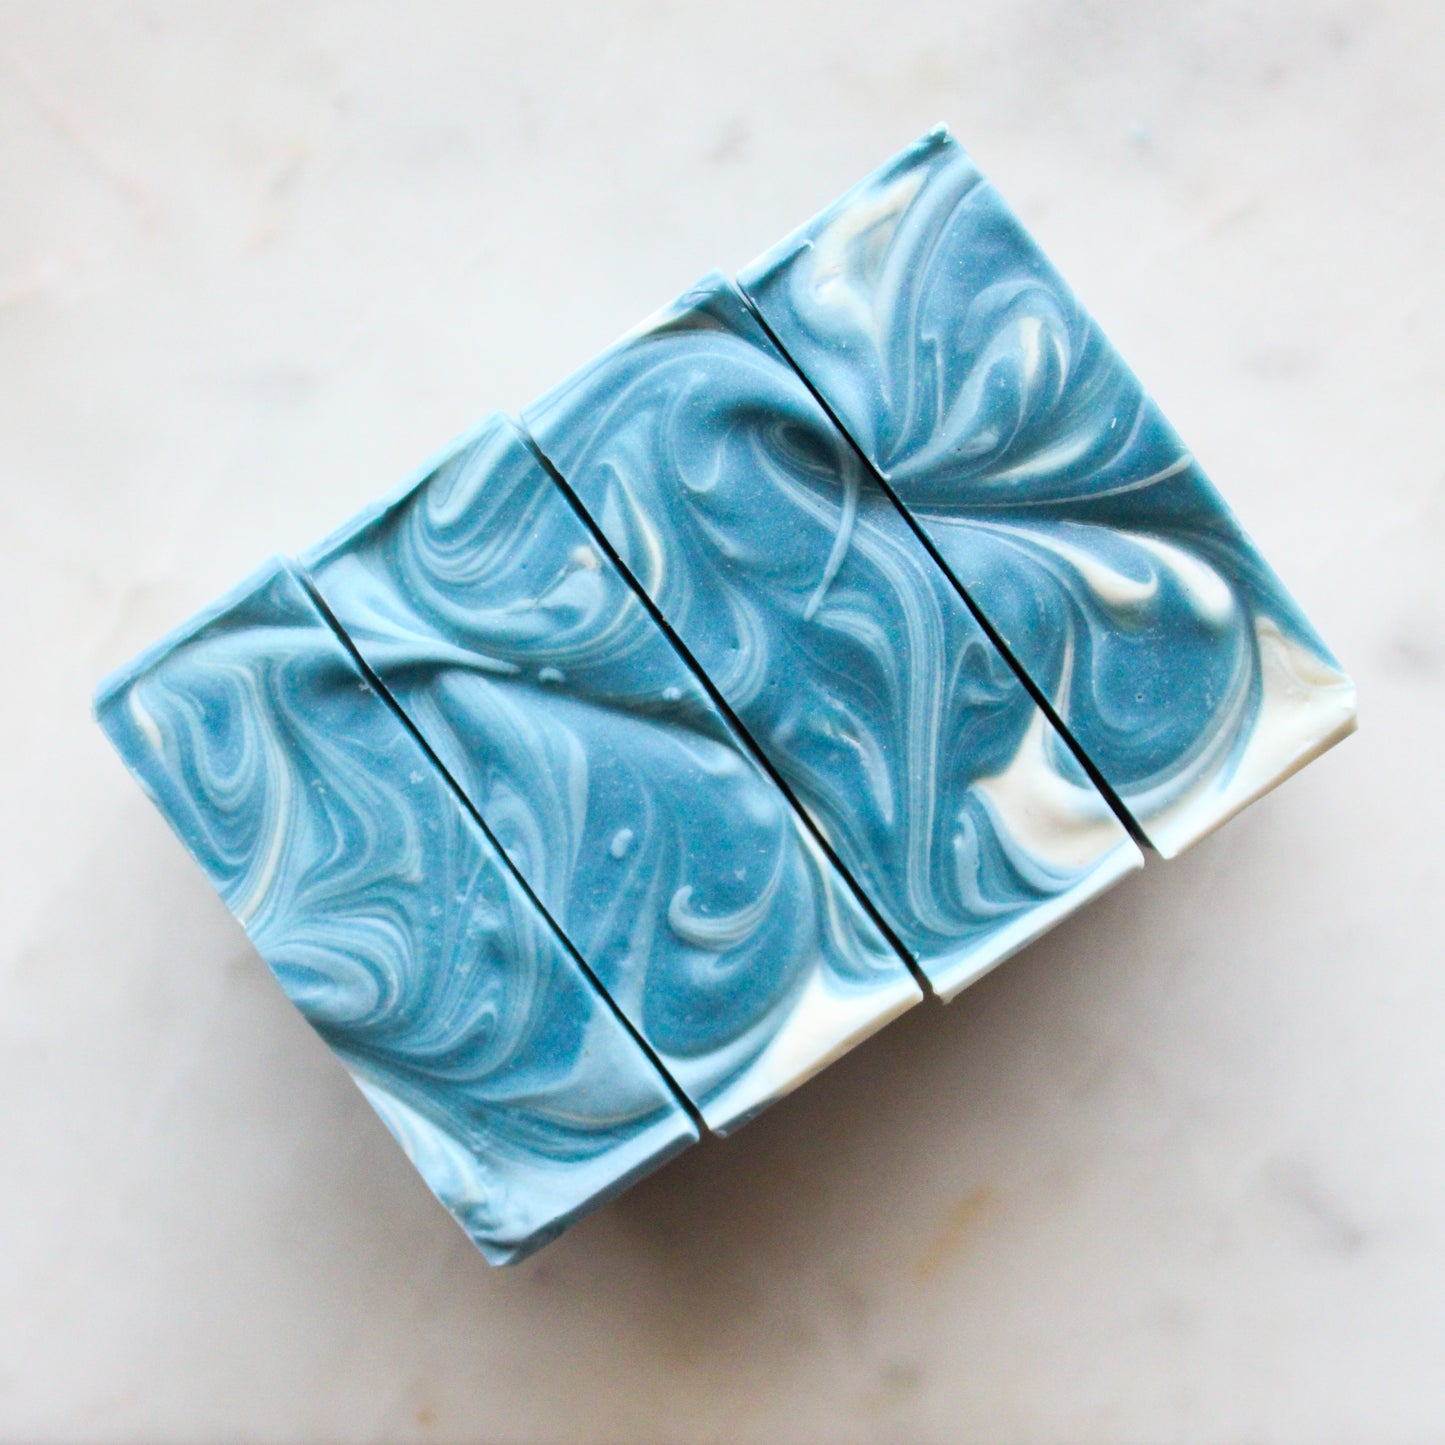 Tranquility Artisan Soap